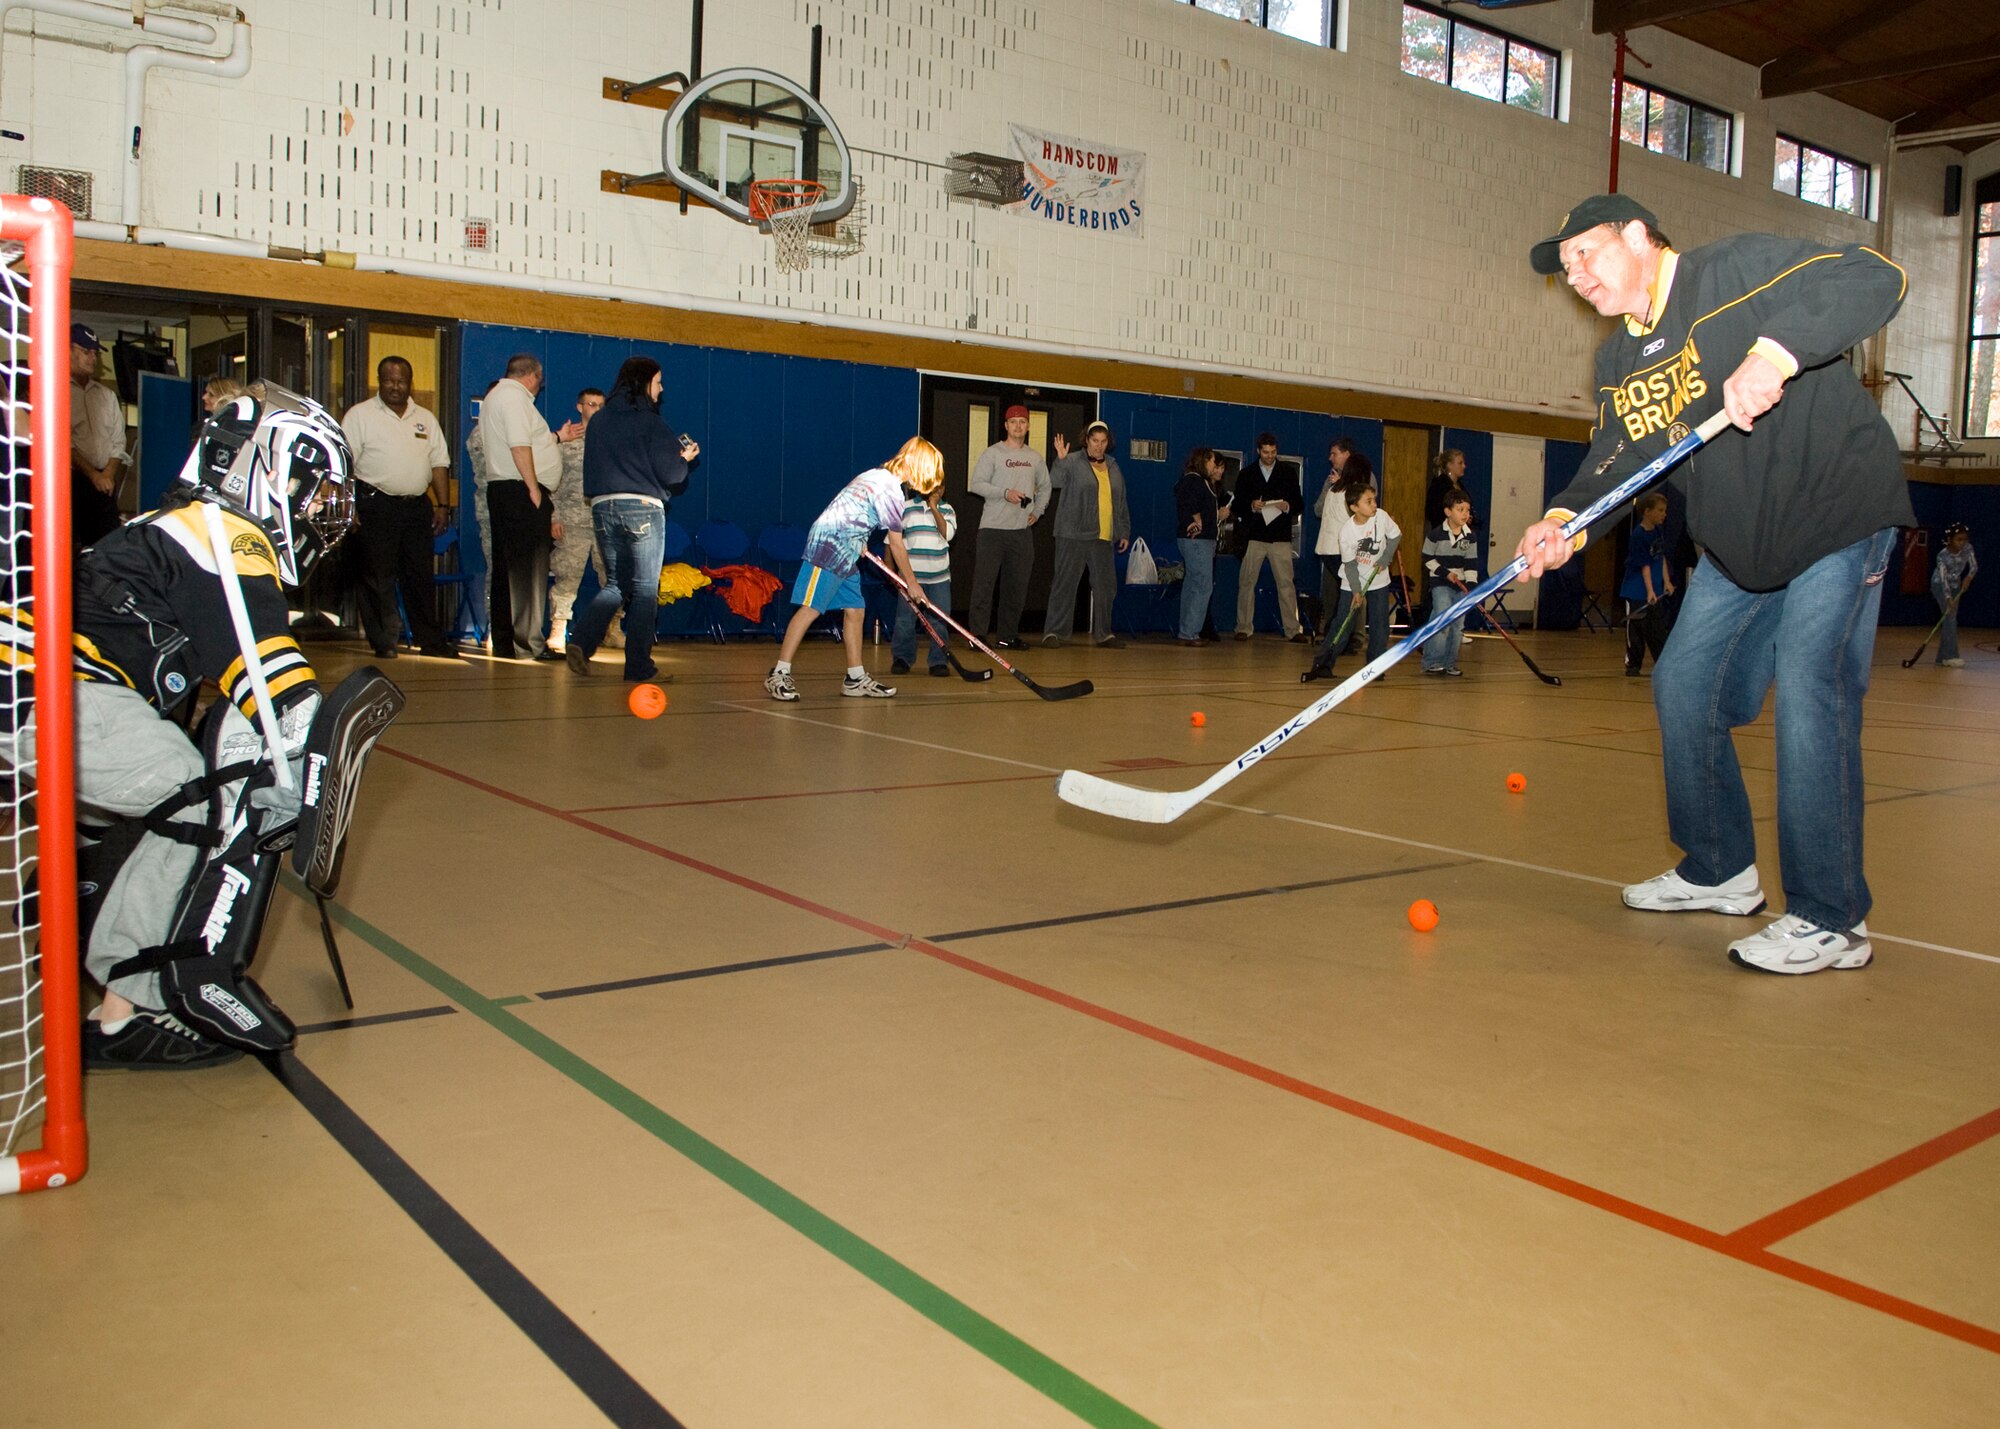 HANSCOM AIR FORCE BASE, Mass. – Boston Bruins alumnus Tommy Songin takes a shot on goalie Justin Netemeyer during an Air Force Family Week street hockey event at the Hanscom Youth Center, Nov. 4, sponsored by the Boston Bruins and Operation Homefront. Bruins staff led Hanscom children through a number of street hockey drills focusing on the fundamentals of play. The Bruins donated all of the street hockey equipment they brought to the base to Hanscom’s Youth Center so children could continue to enjoy the game. (U.S. Air Force photo by Walter Santos)